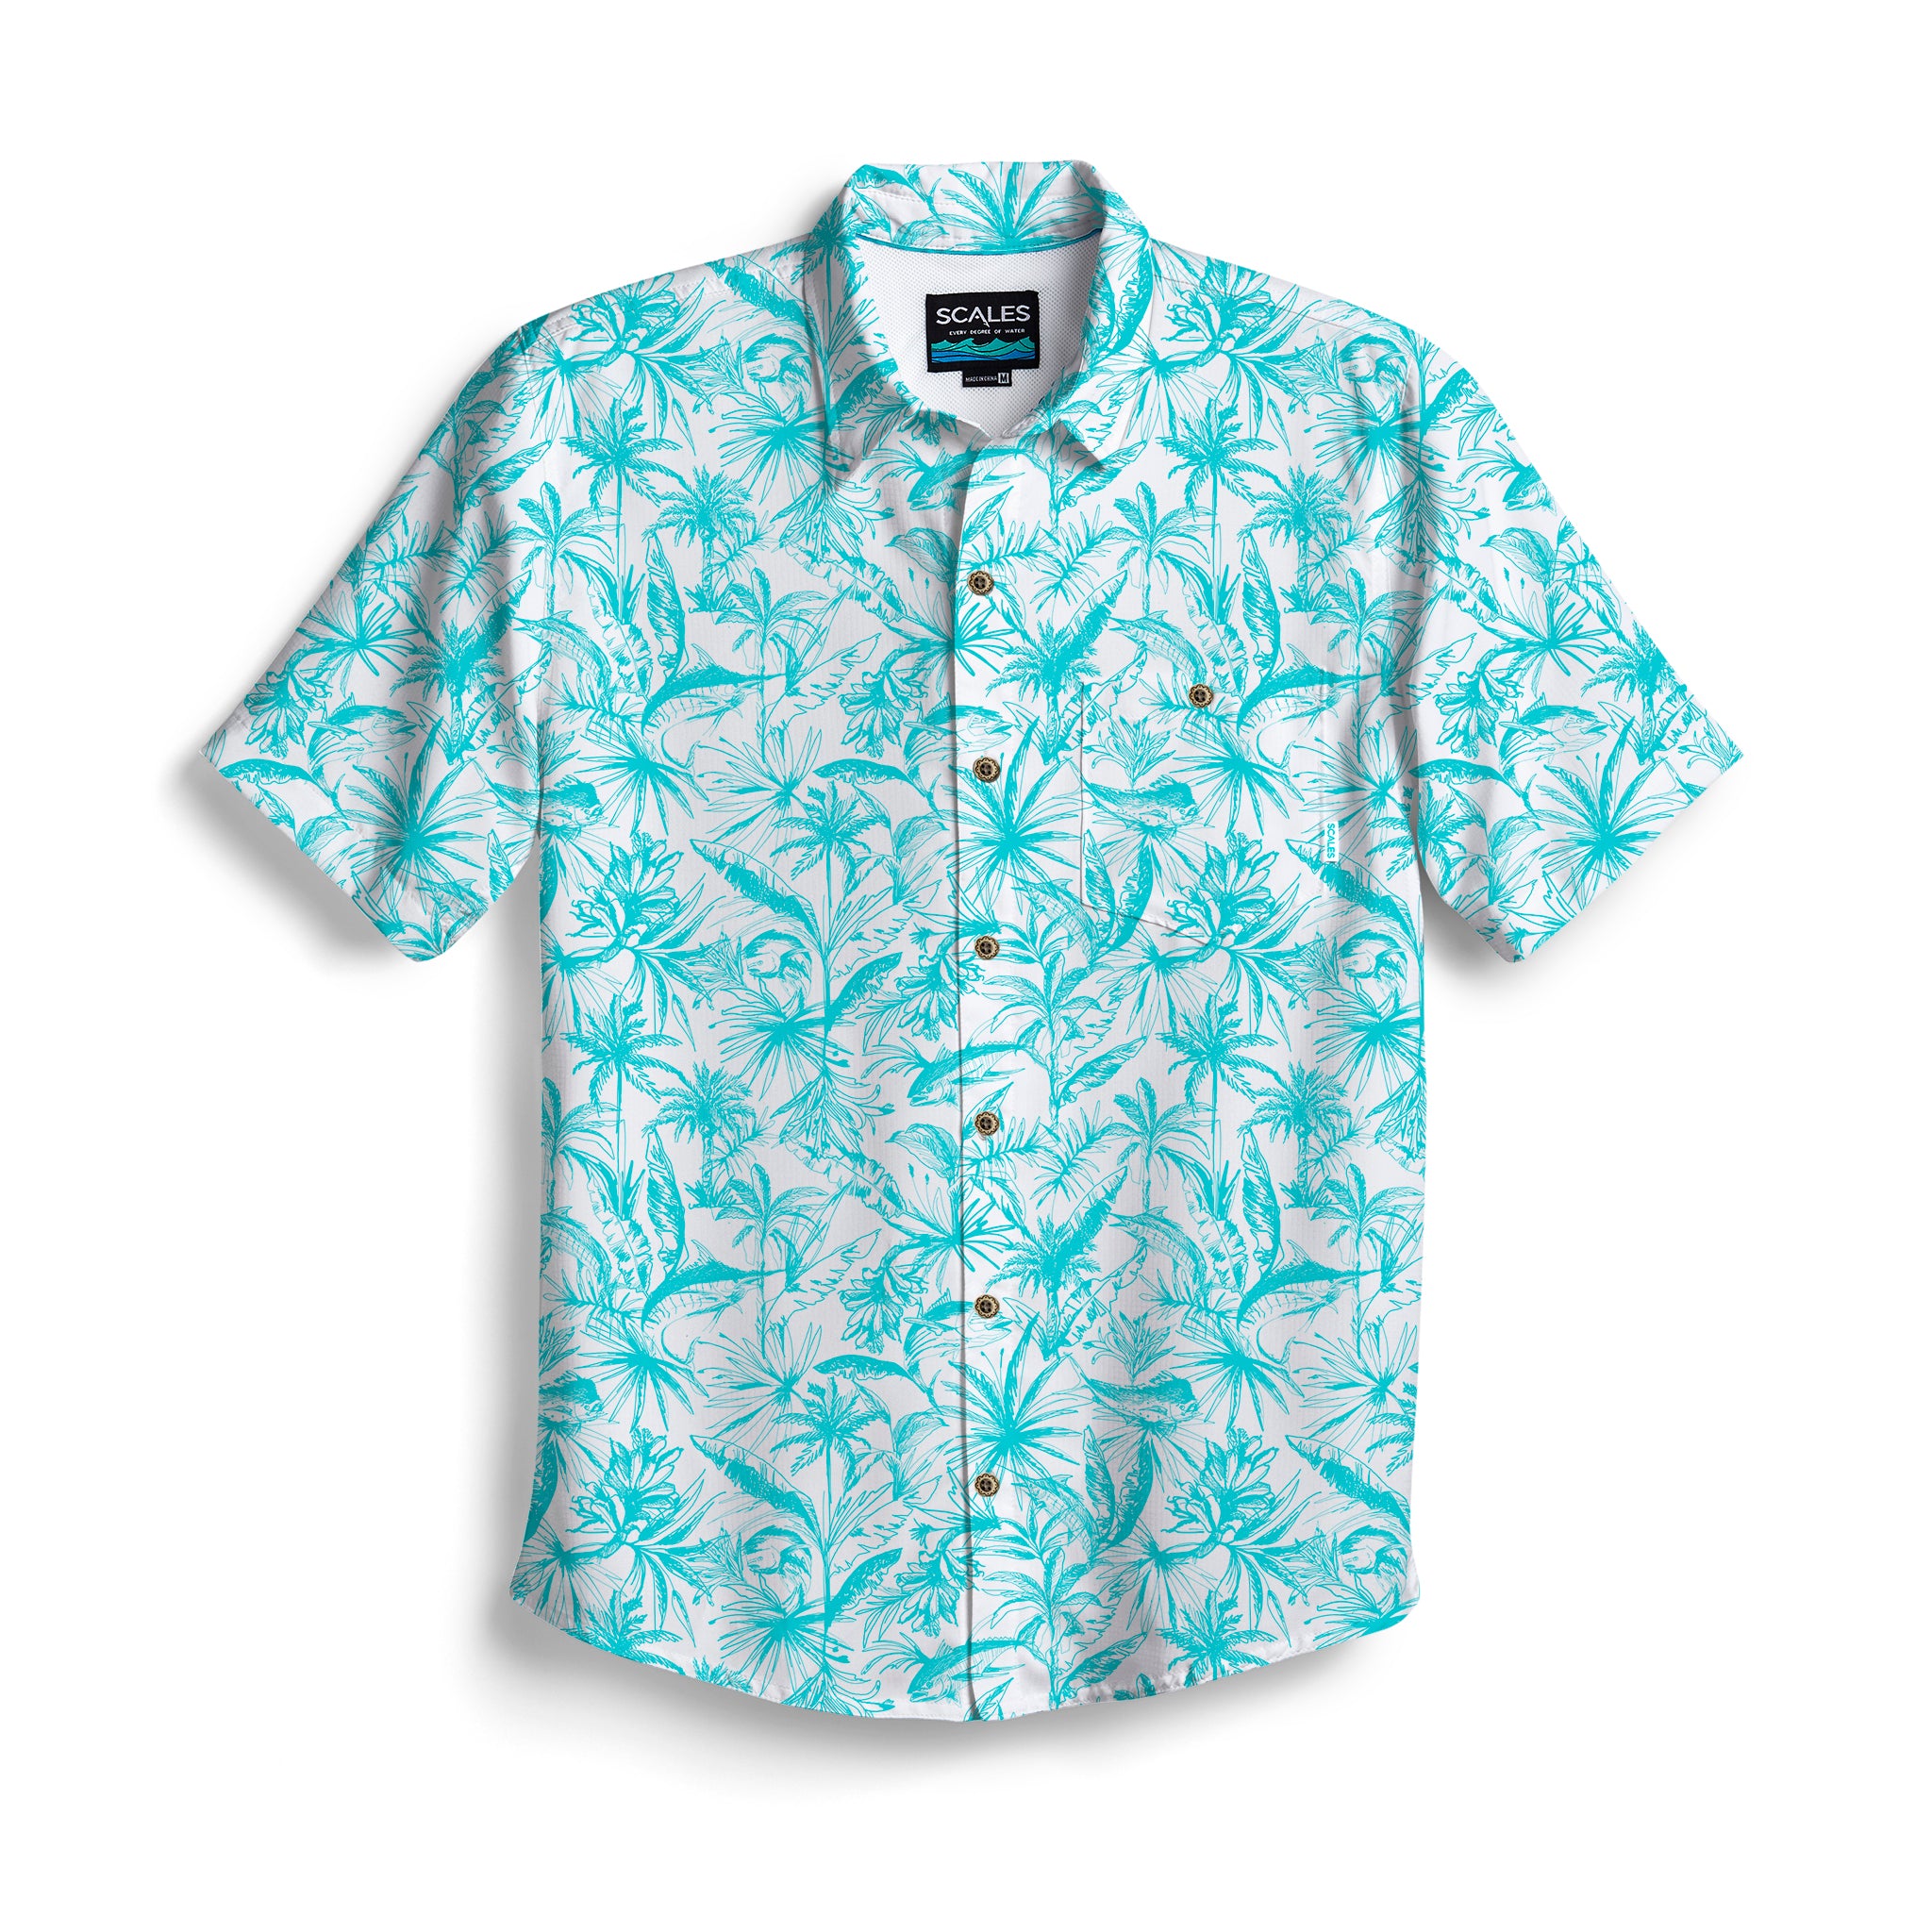 Scales Loose Lines Button Down in White / Aqua Size 2XL